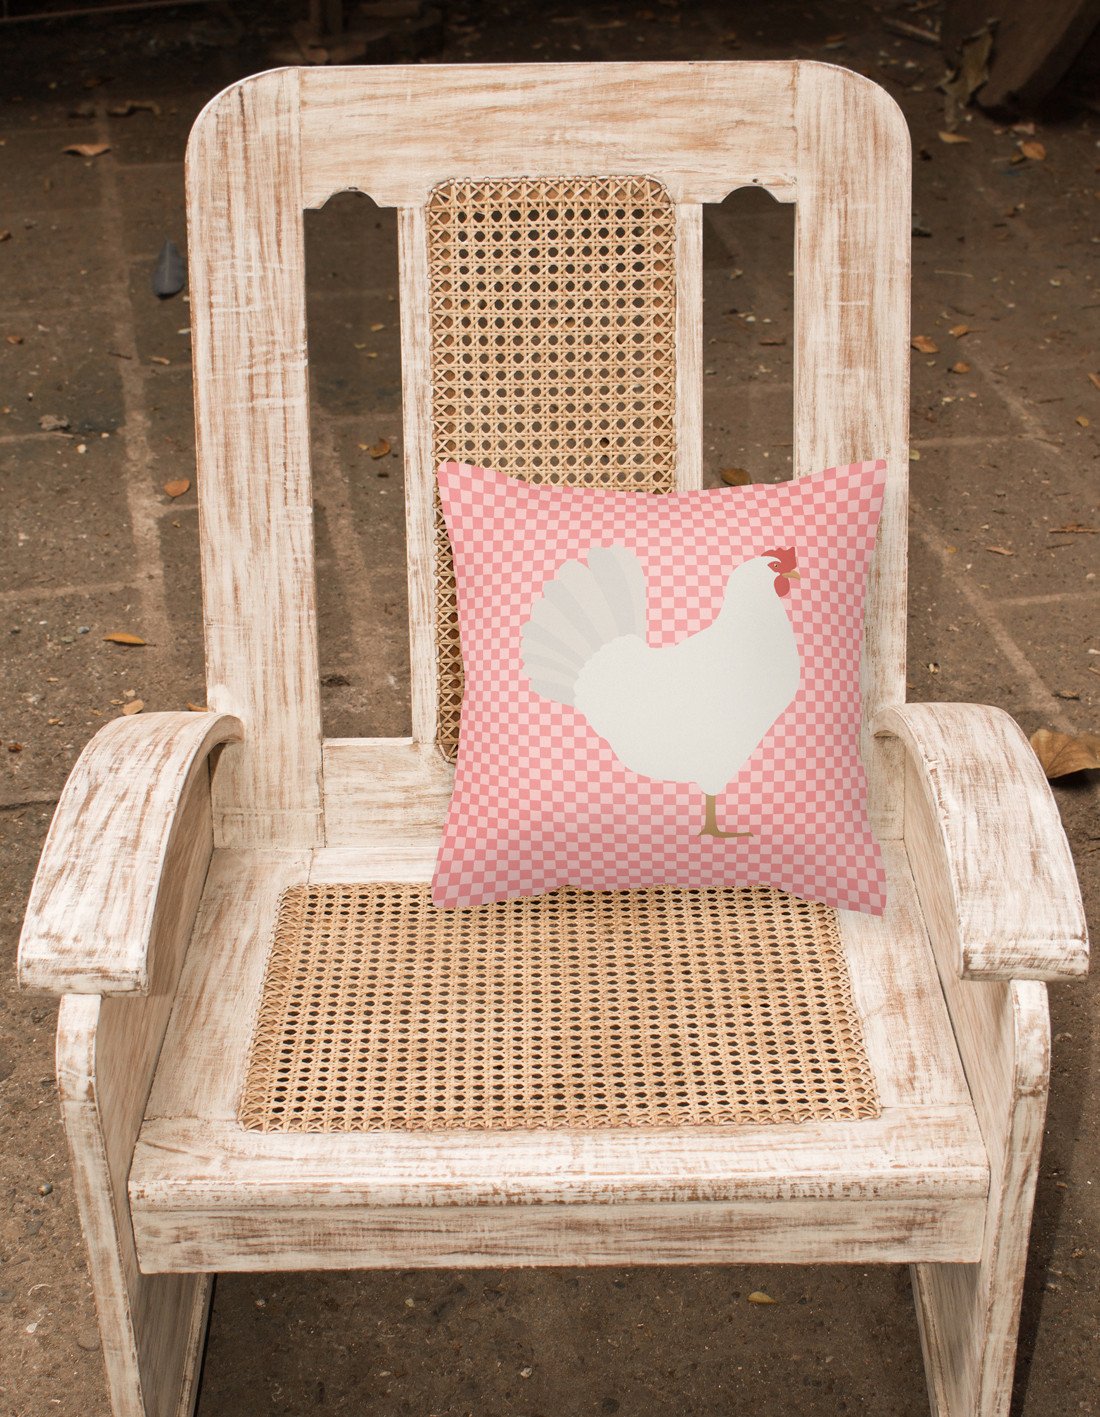 Leghorn Chicken Pink Check Fabric Decorative Pillow BB7840PW1818 by Caroline's Treasures